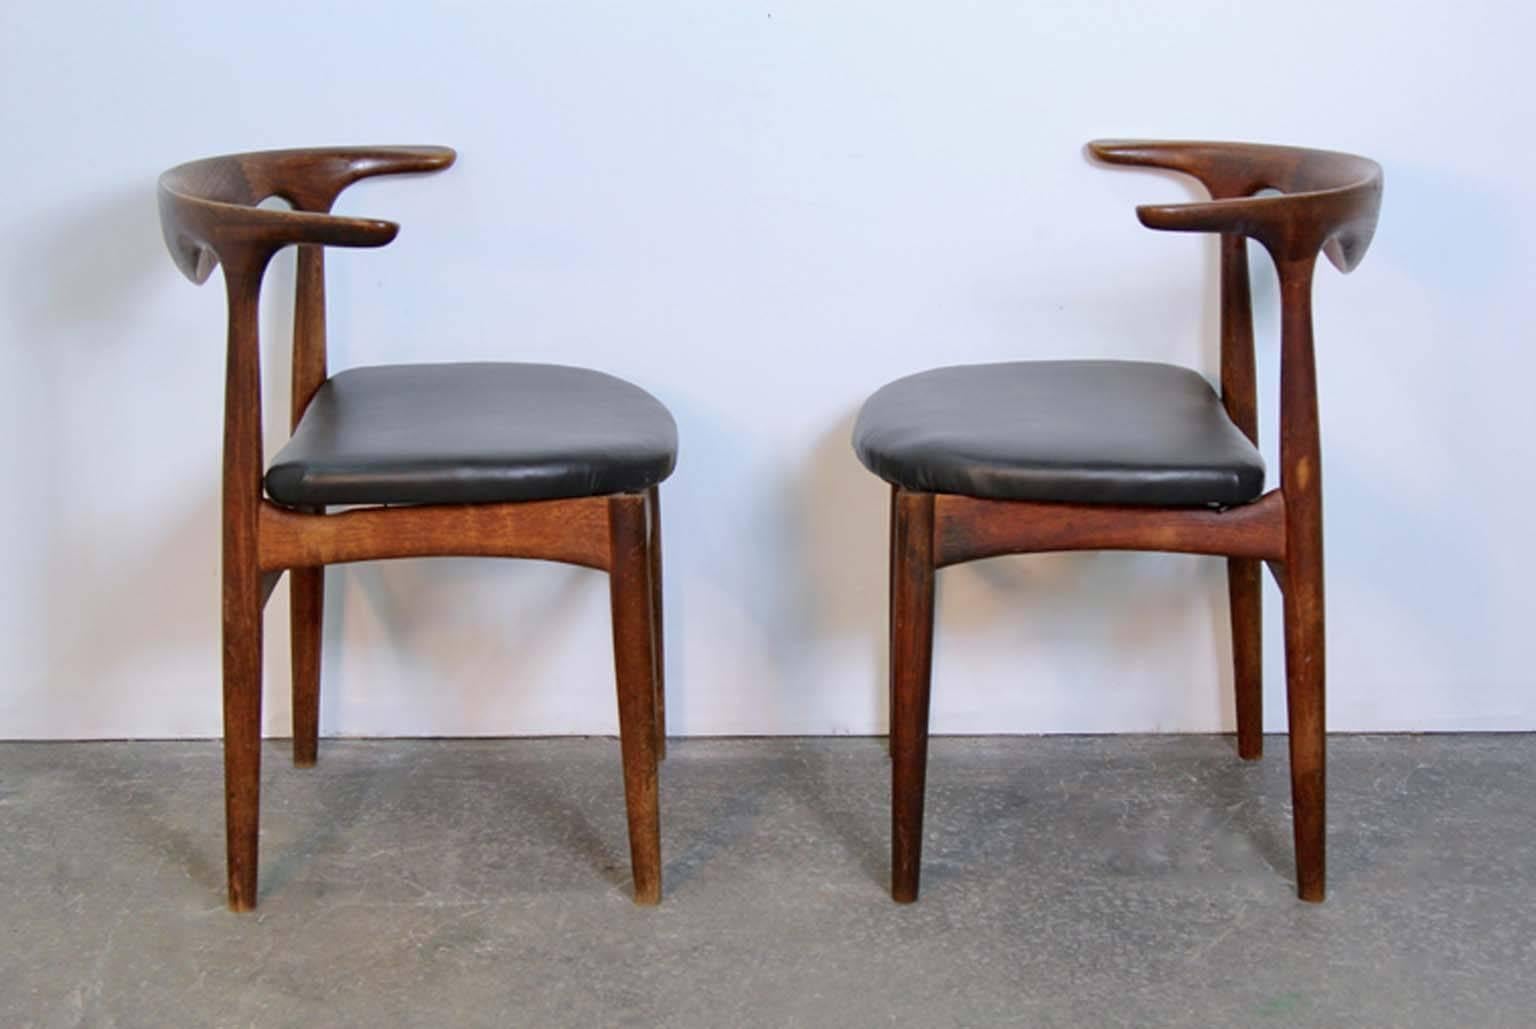 Scandinavian Modern Pair of Danish Modern Teak and Leather Seat Chairs For Sale